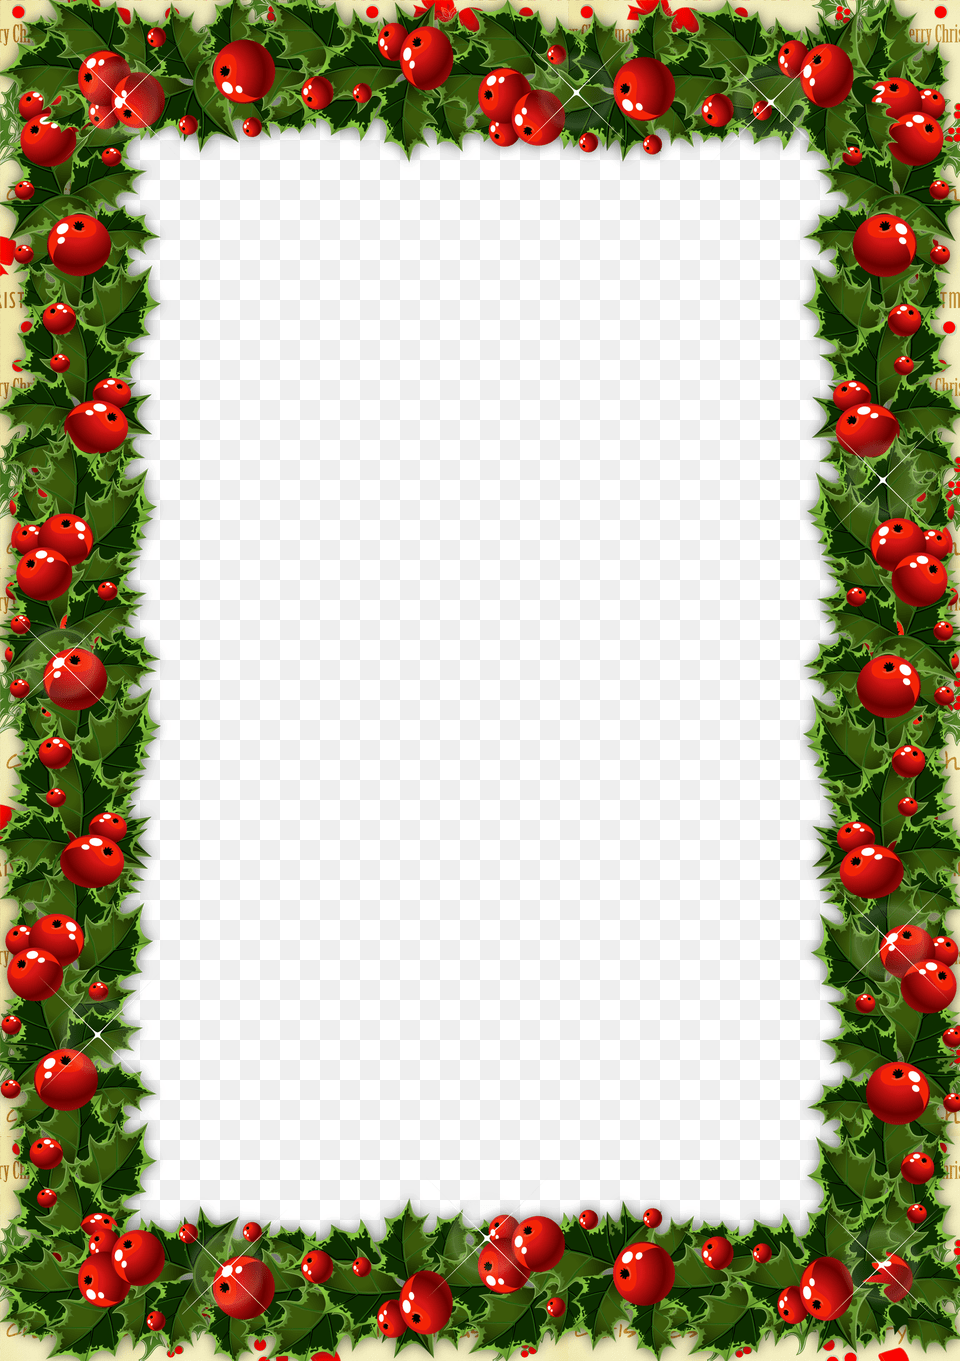 Christmas Frame Transparent Clipart Christmas Day Picture Weihnachten Rahmen Clipart Kostenlos, Home Decor, Art, Graphics, Food Png Image